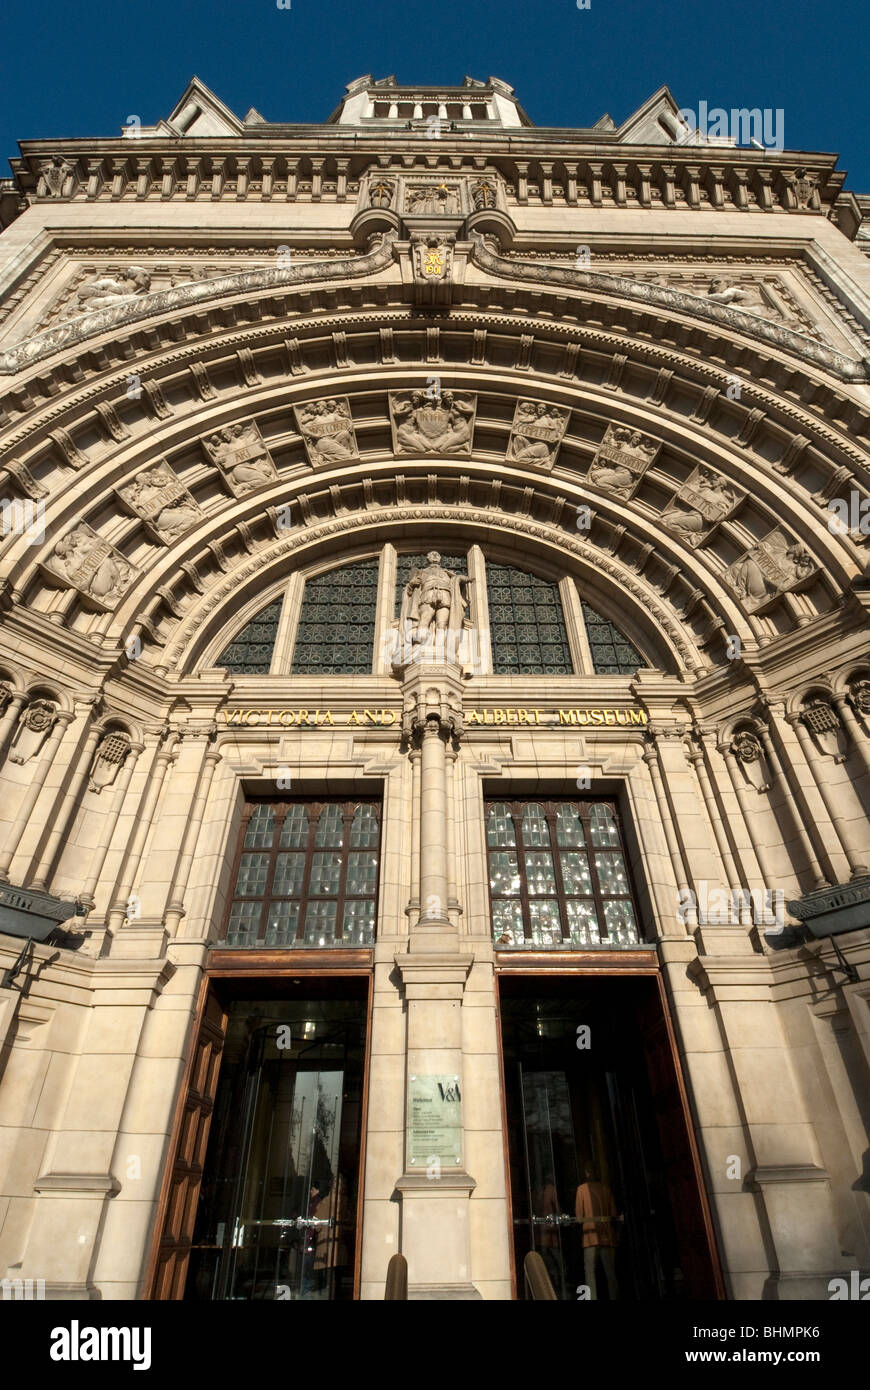 Front entrance of the Victoria and Albert Museum. London, 2012